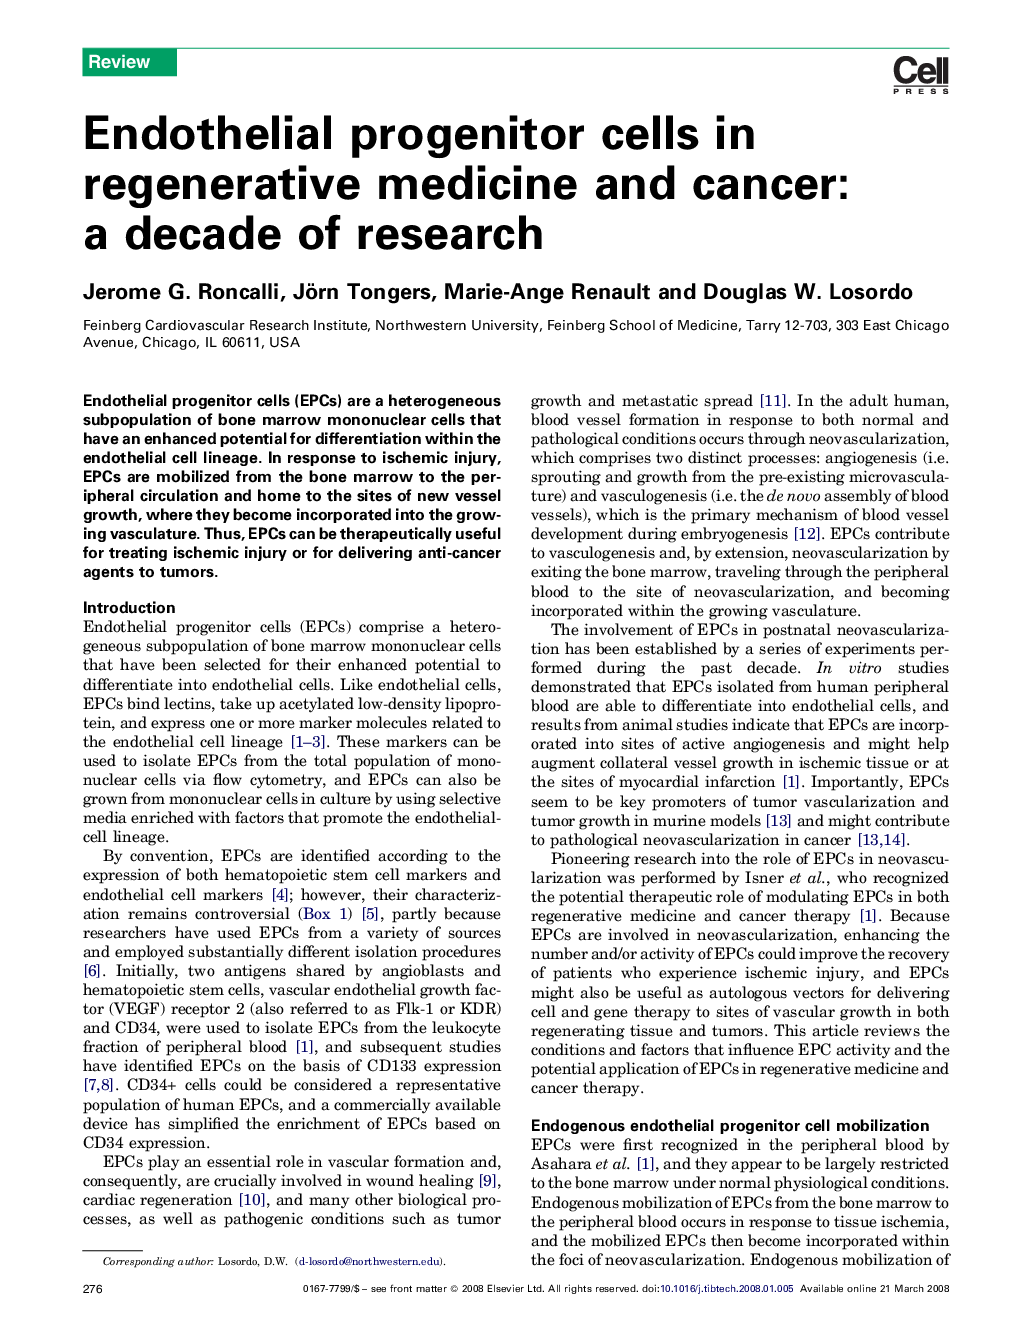 Endothelial progenitor cells in regenerative medicine and cancer: a decade of research